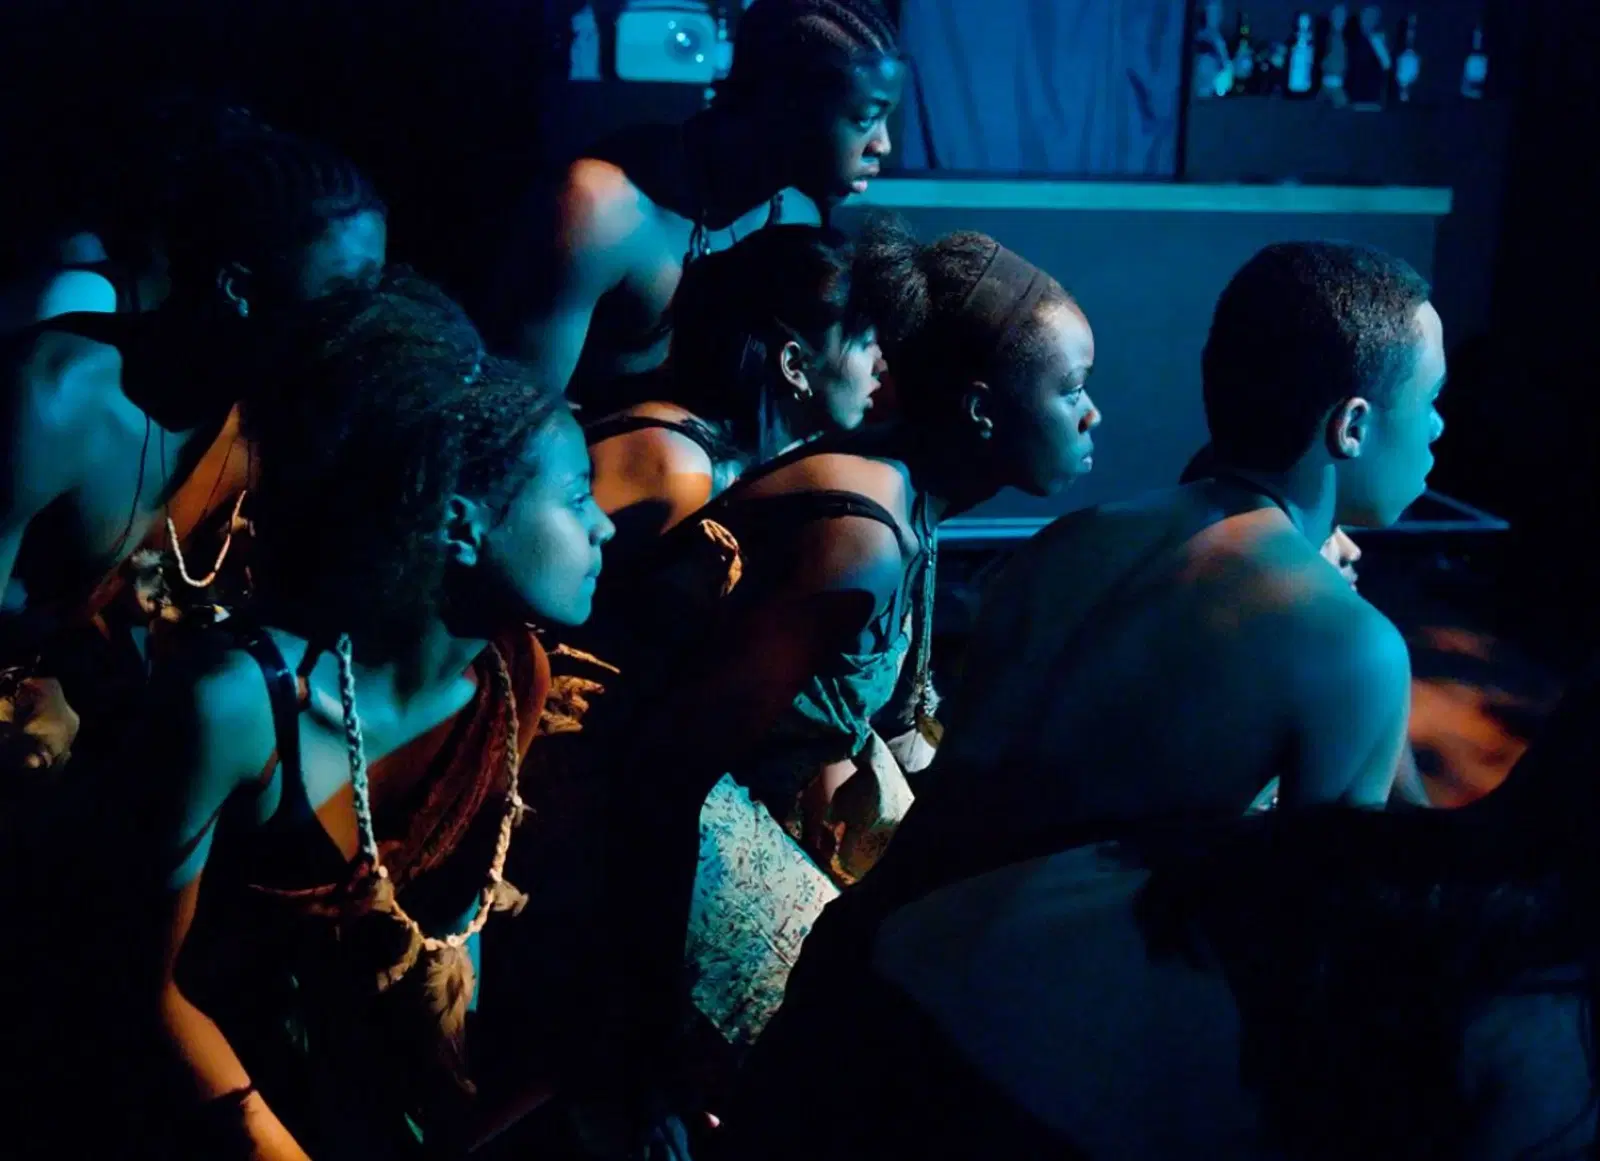 A group of performers in traditional african attire engrossed in a moment backstage, lit by the ambient stage lighting.